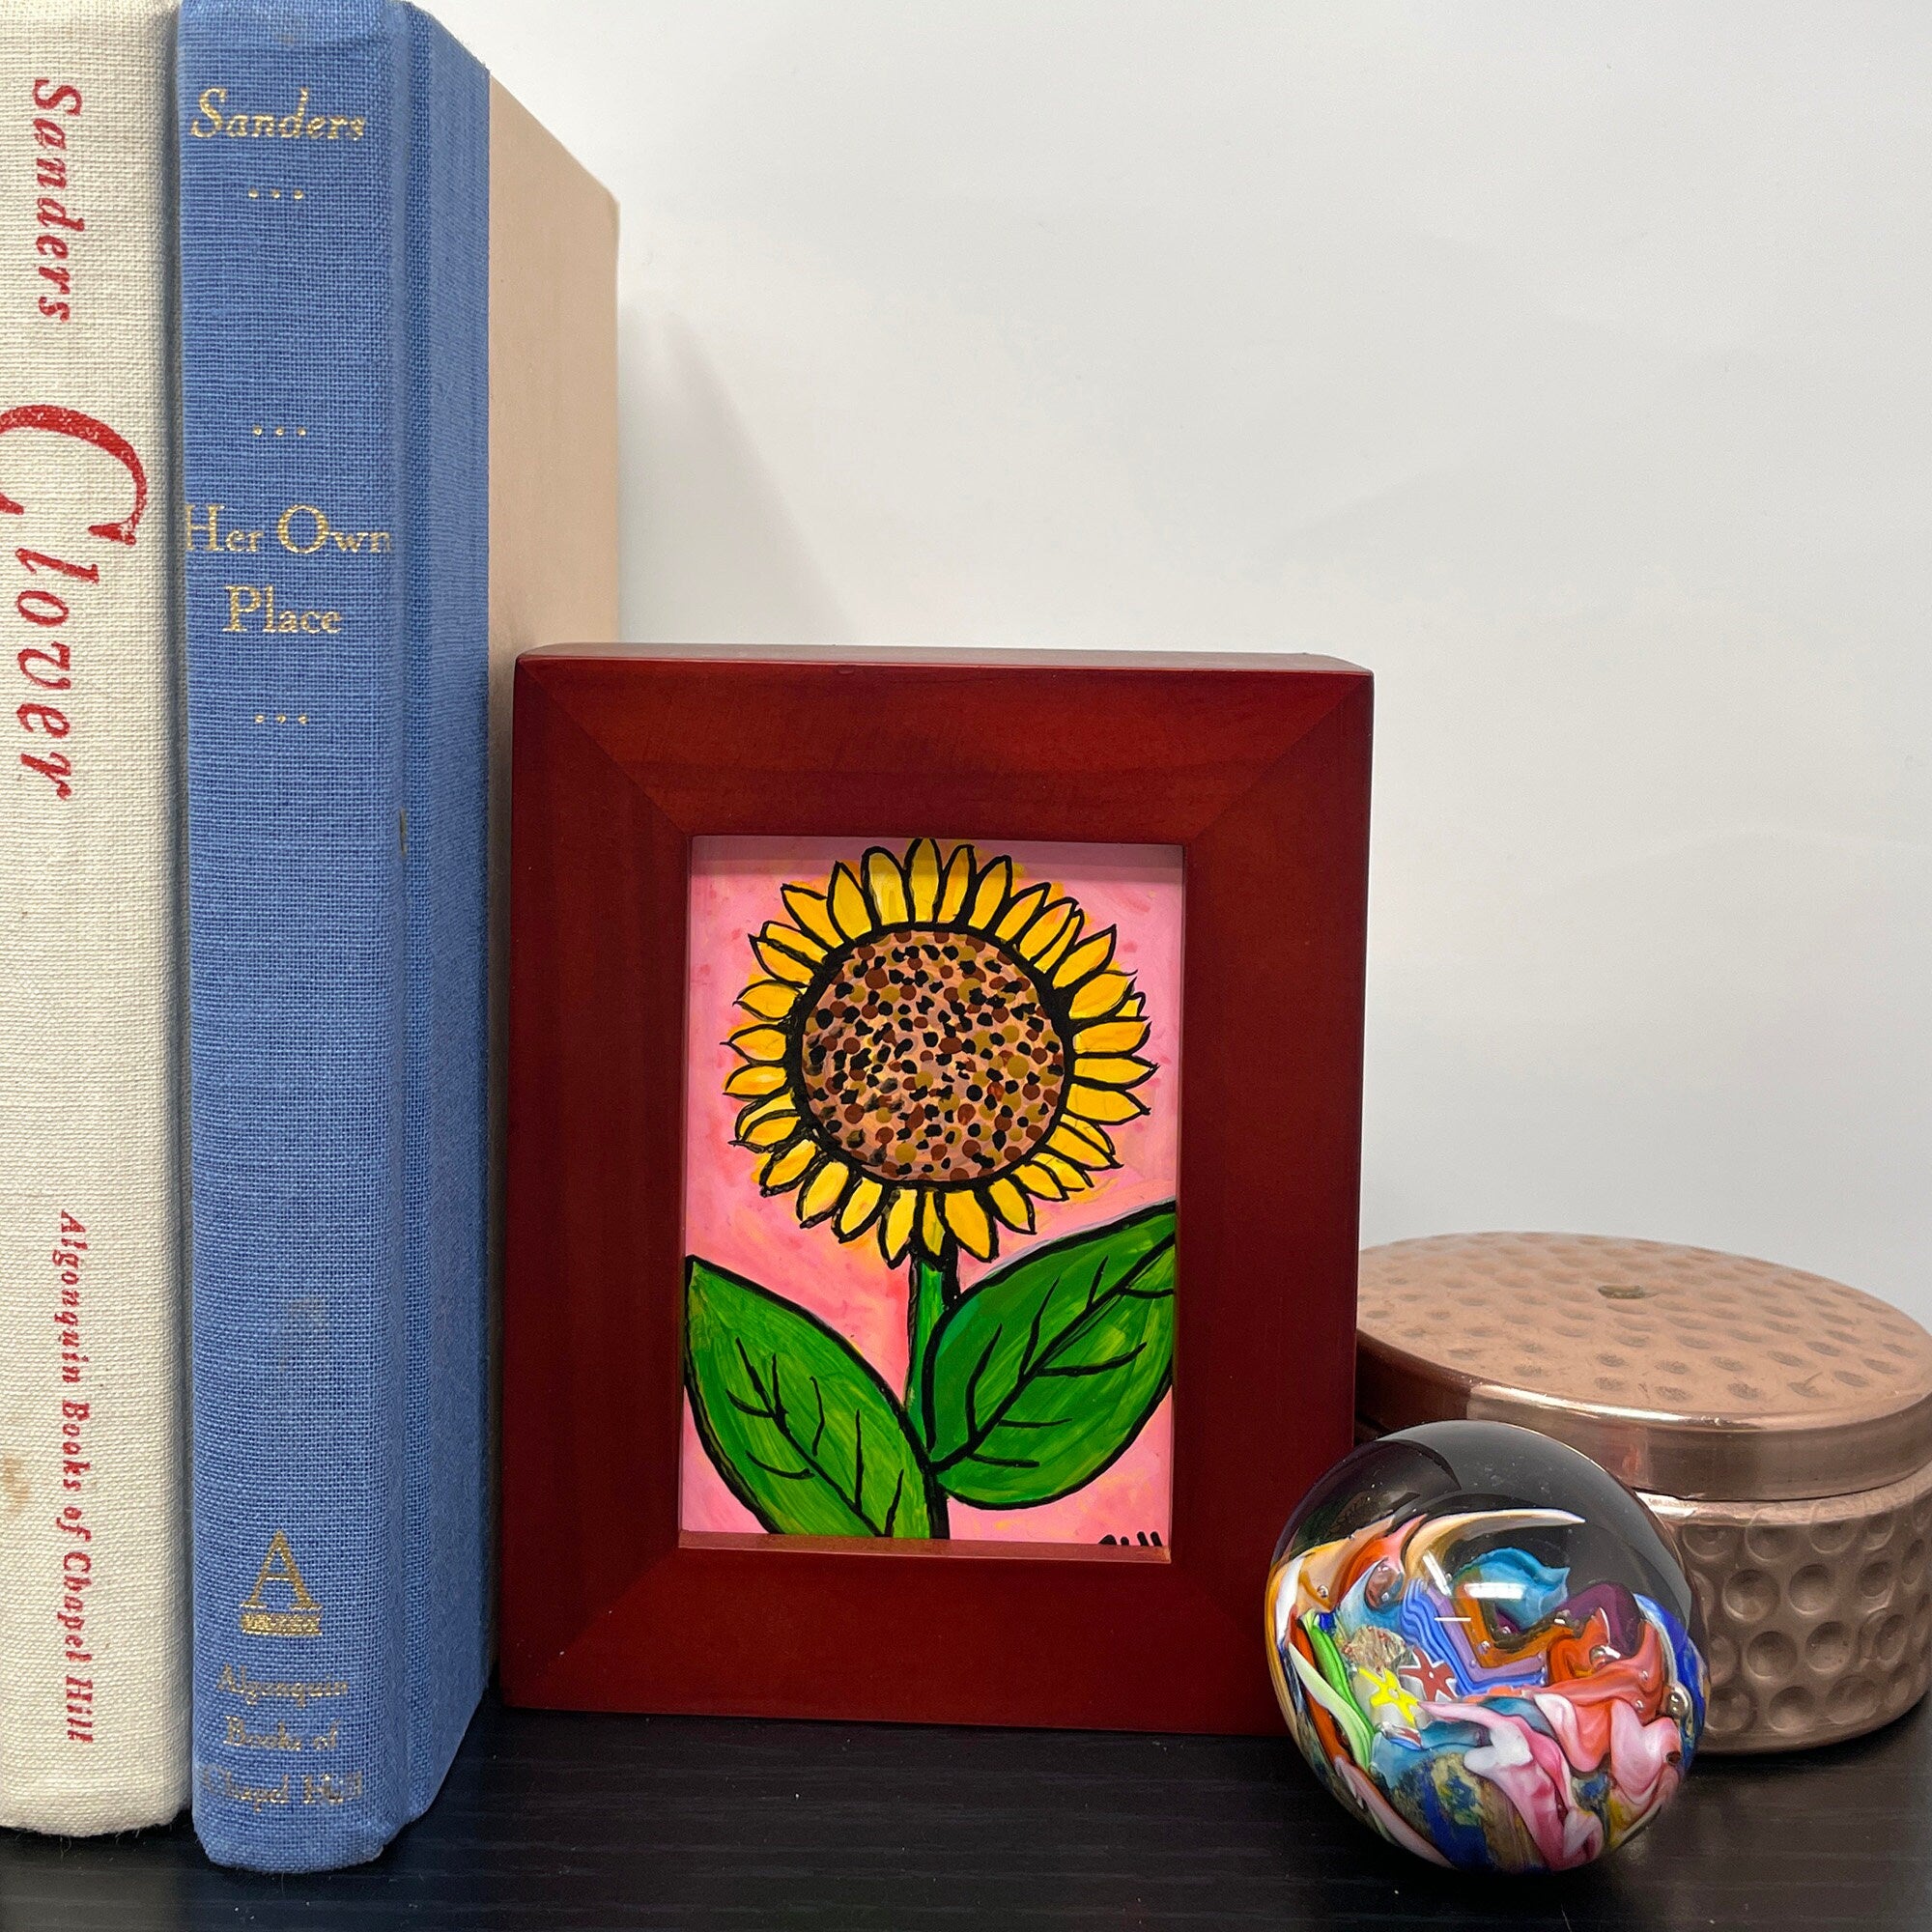 Bookshelf featuring small sunflower painting in cherry wood frame. Sunflower with brown center, yellow petals, and green leaves on pink background